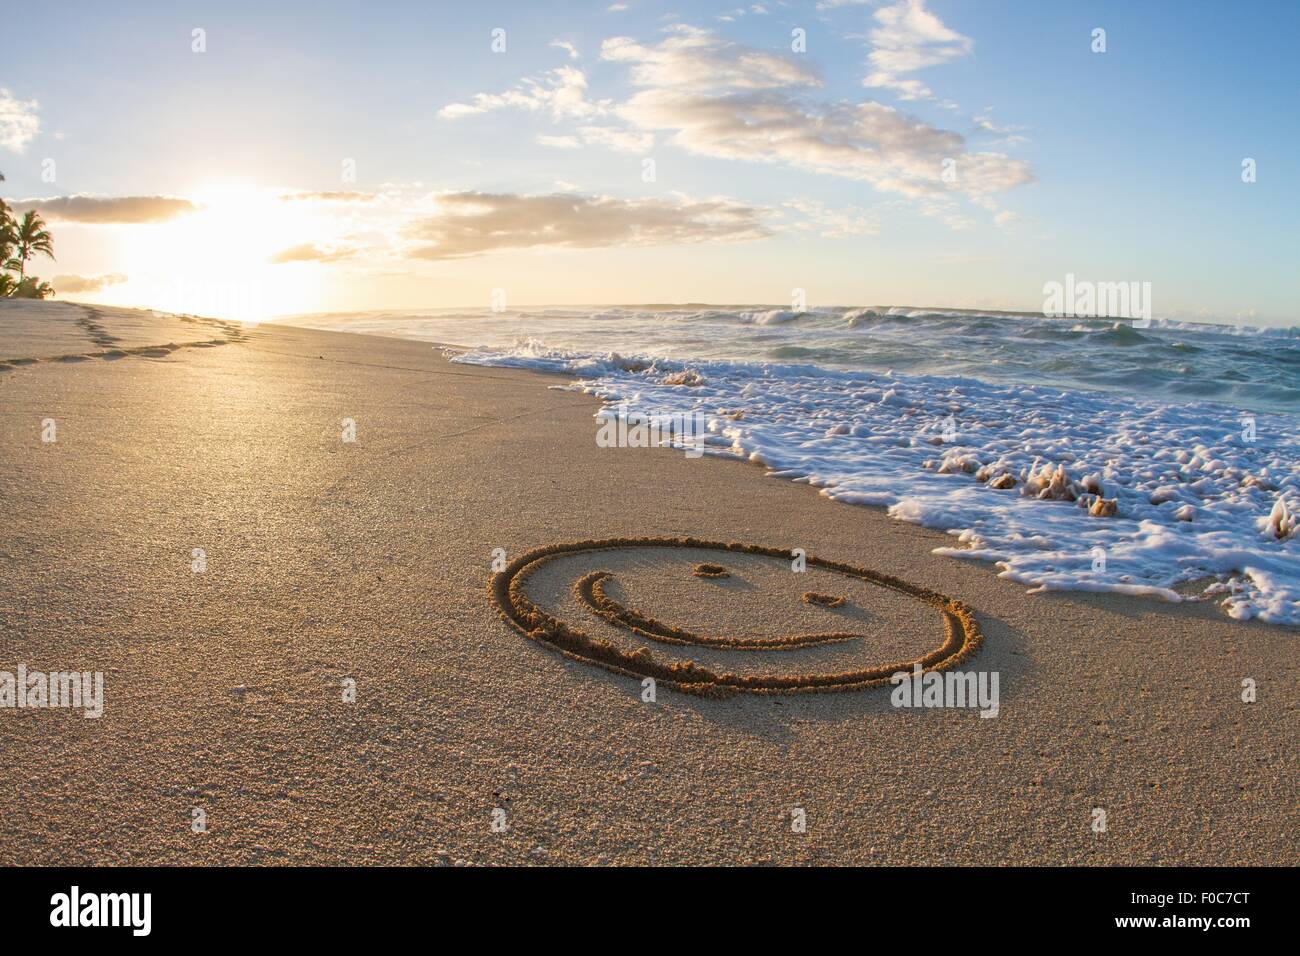 Smiley face, drawn in sand, sunset, Hawaii Stock Photo